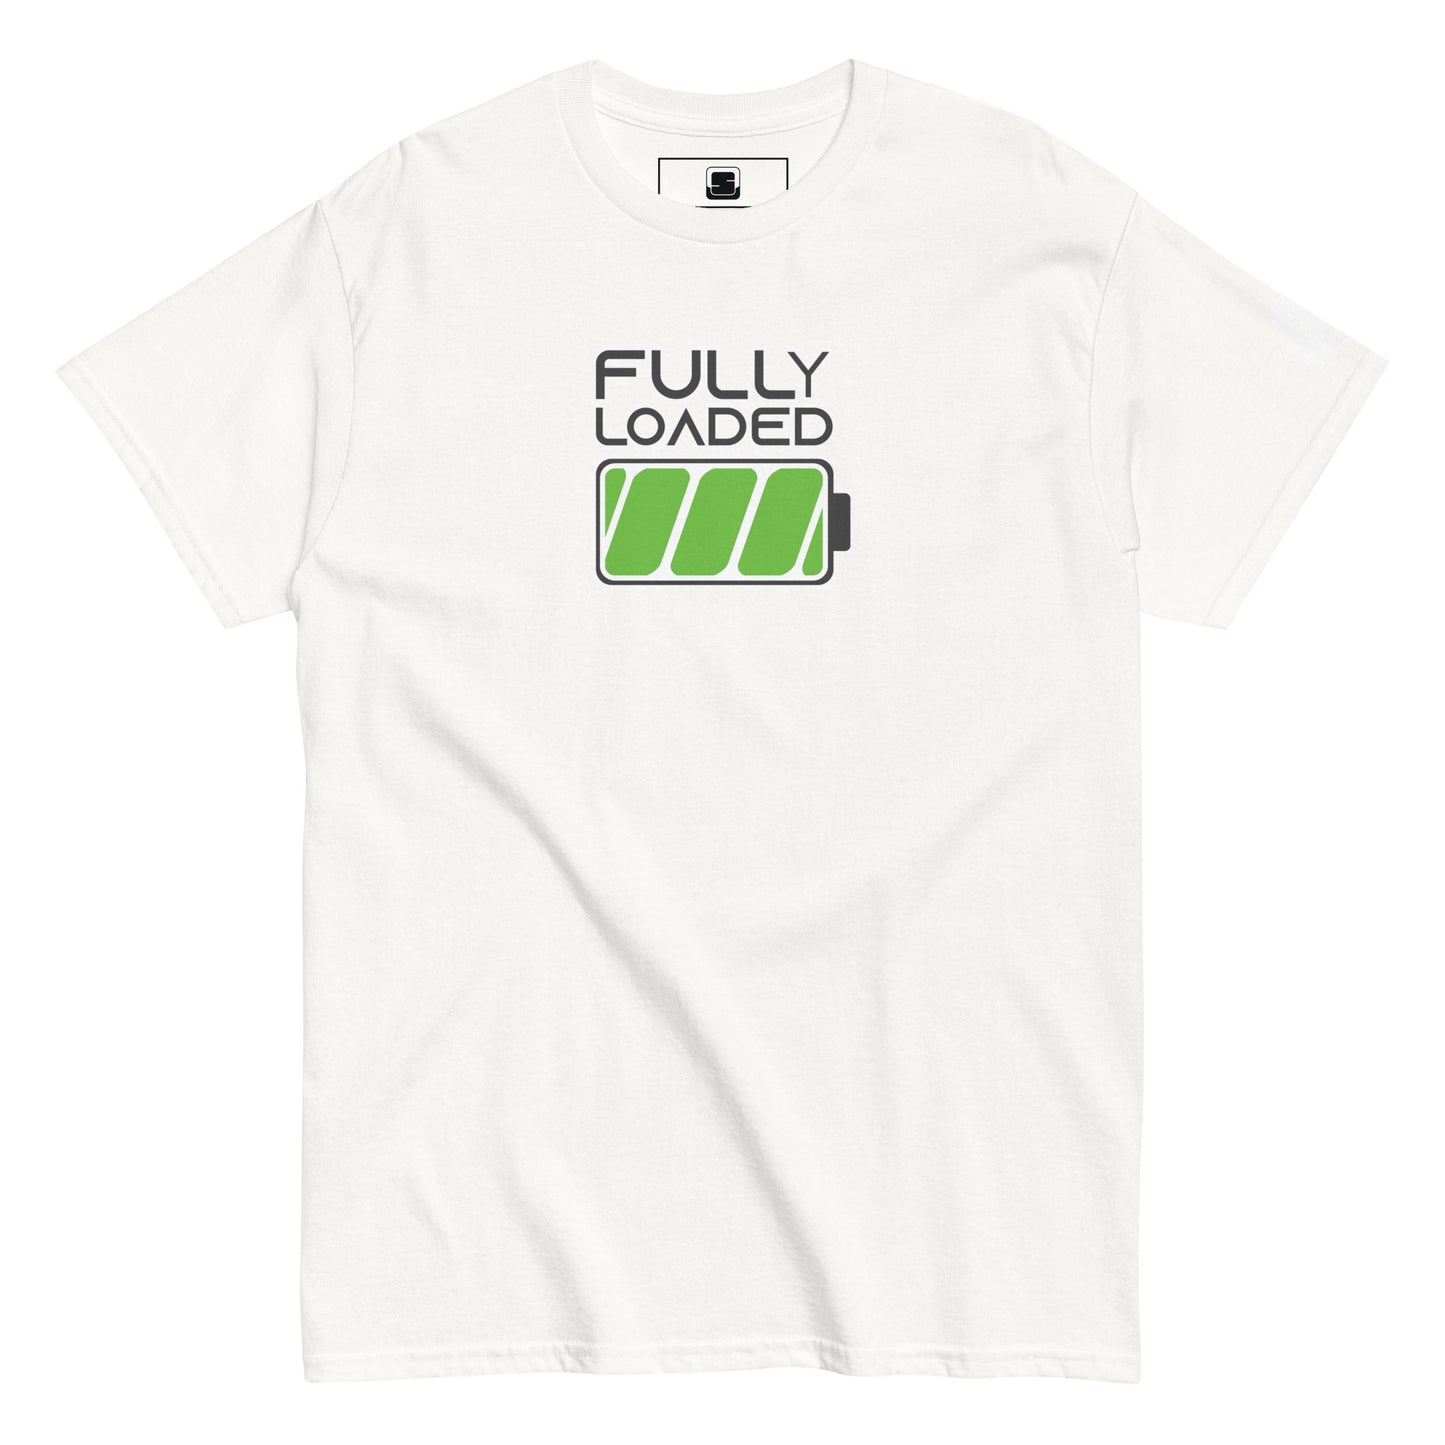 Power Up: The Fully Loaded Tee